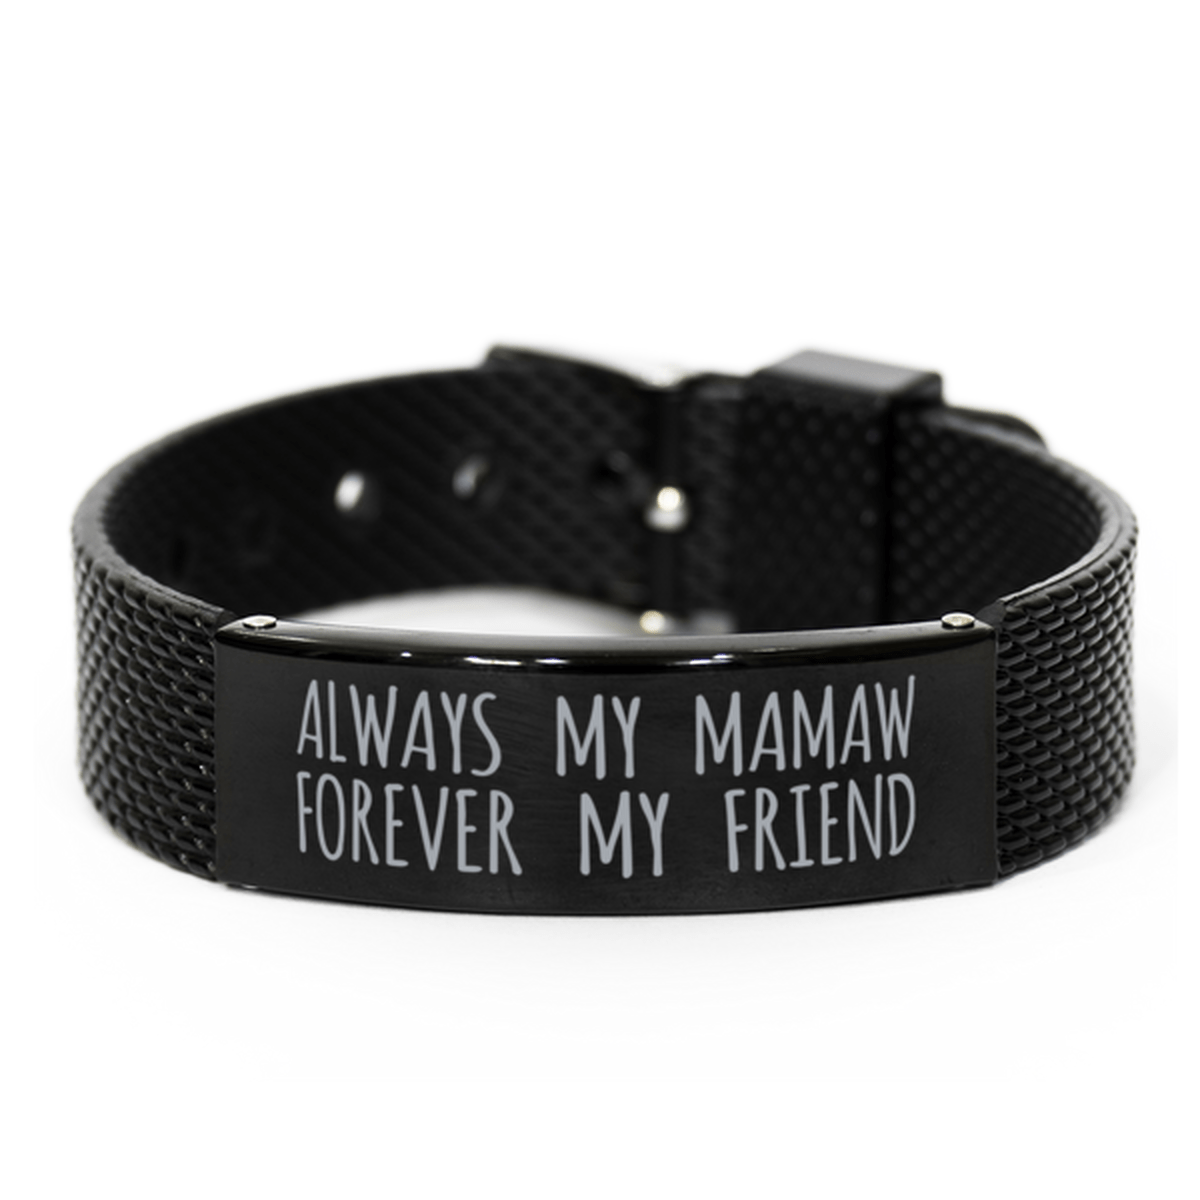 Inspirational Mamaw Black Shark Mesh Bracelet, Always My Mamaw Forever My Friend, Best Birthday Gifts for Family Friends